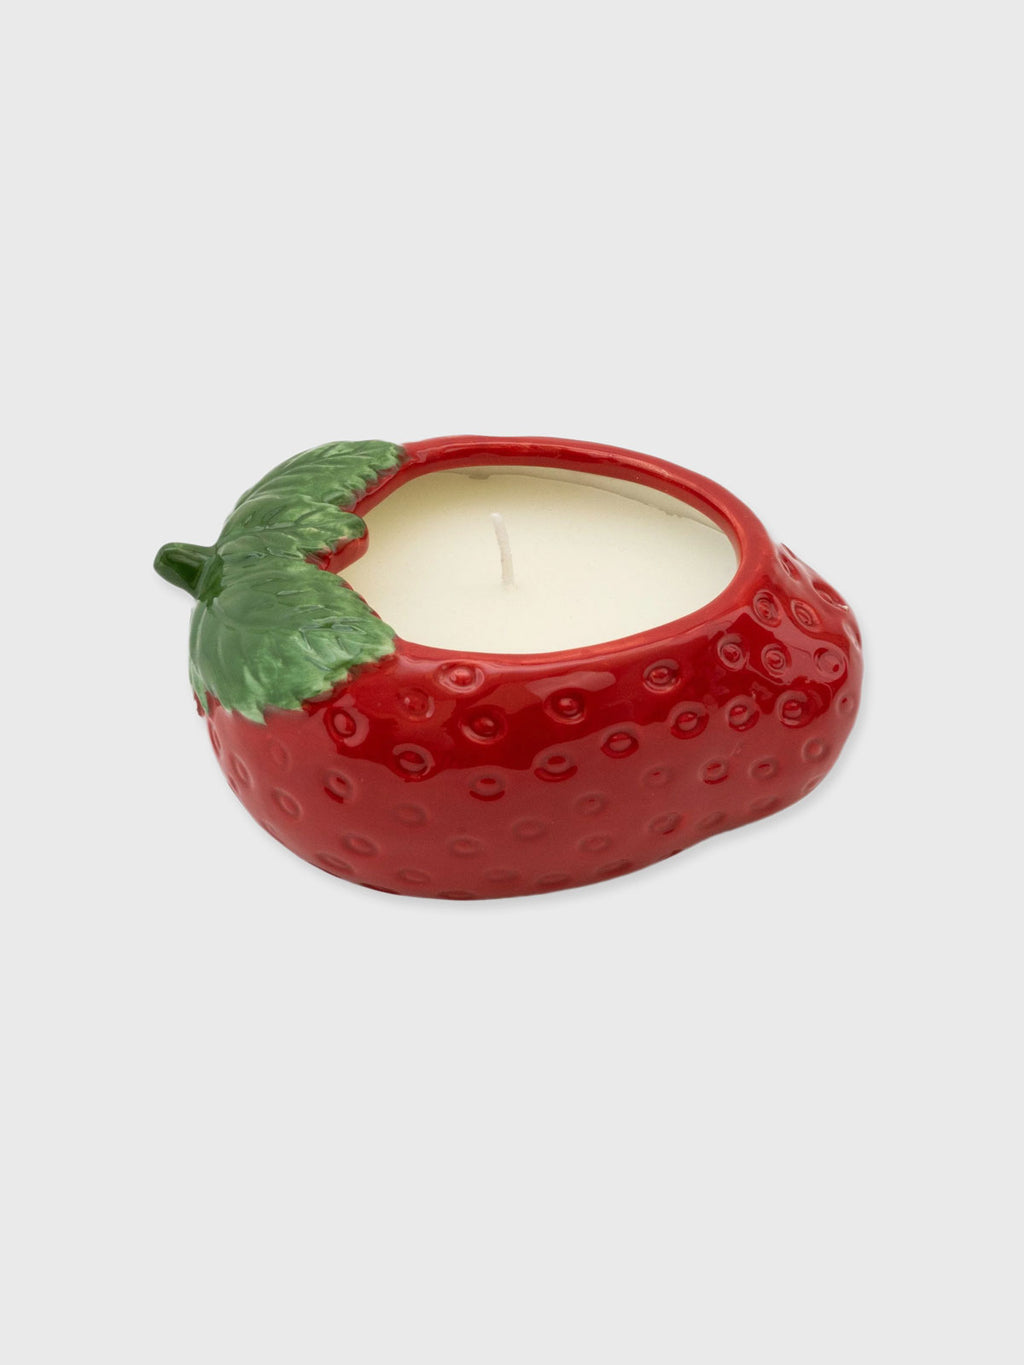 Strawberry Candle in ceramic pot